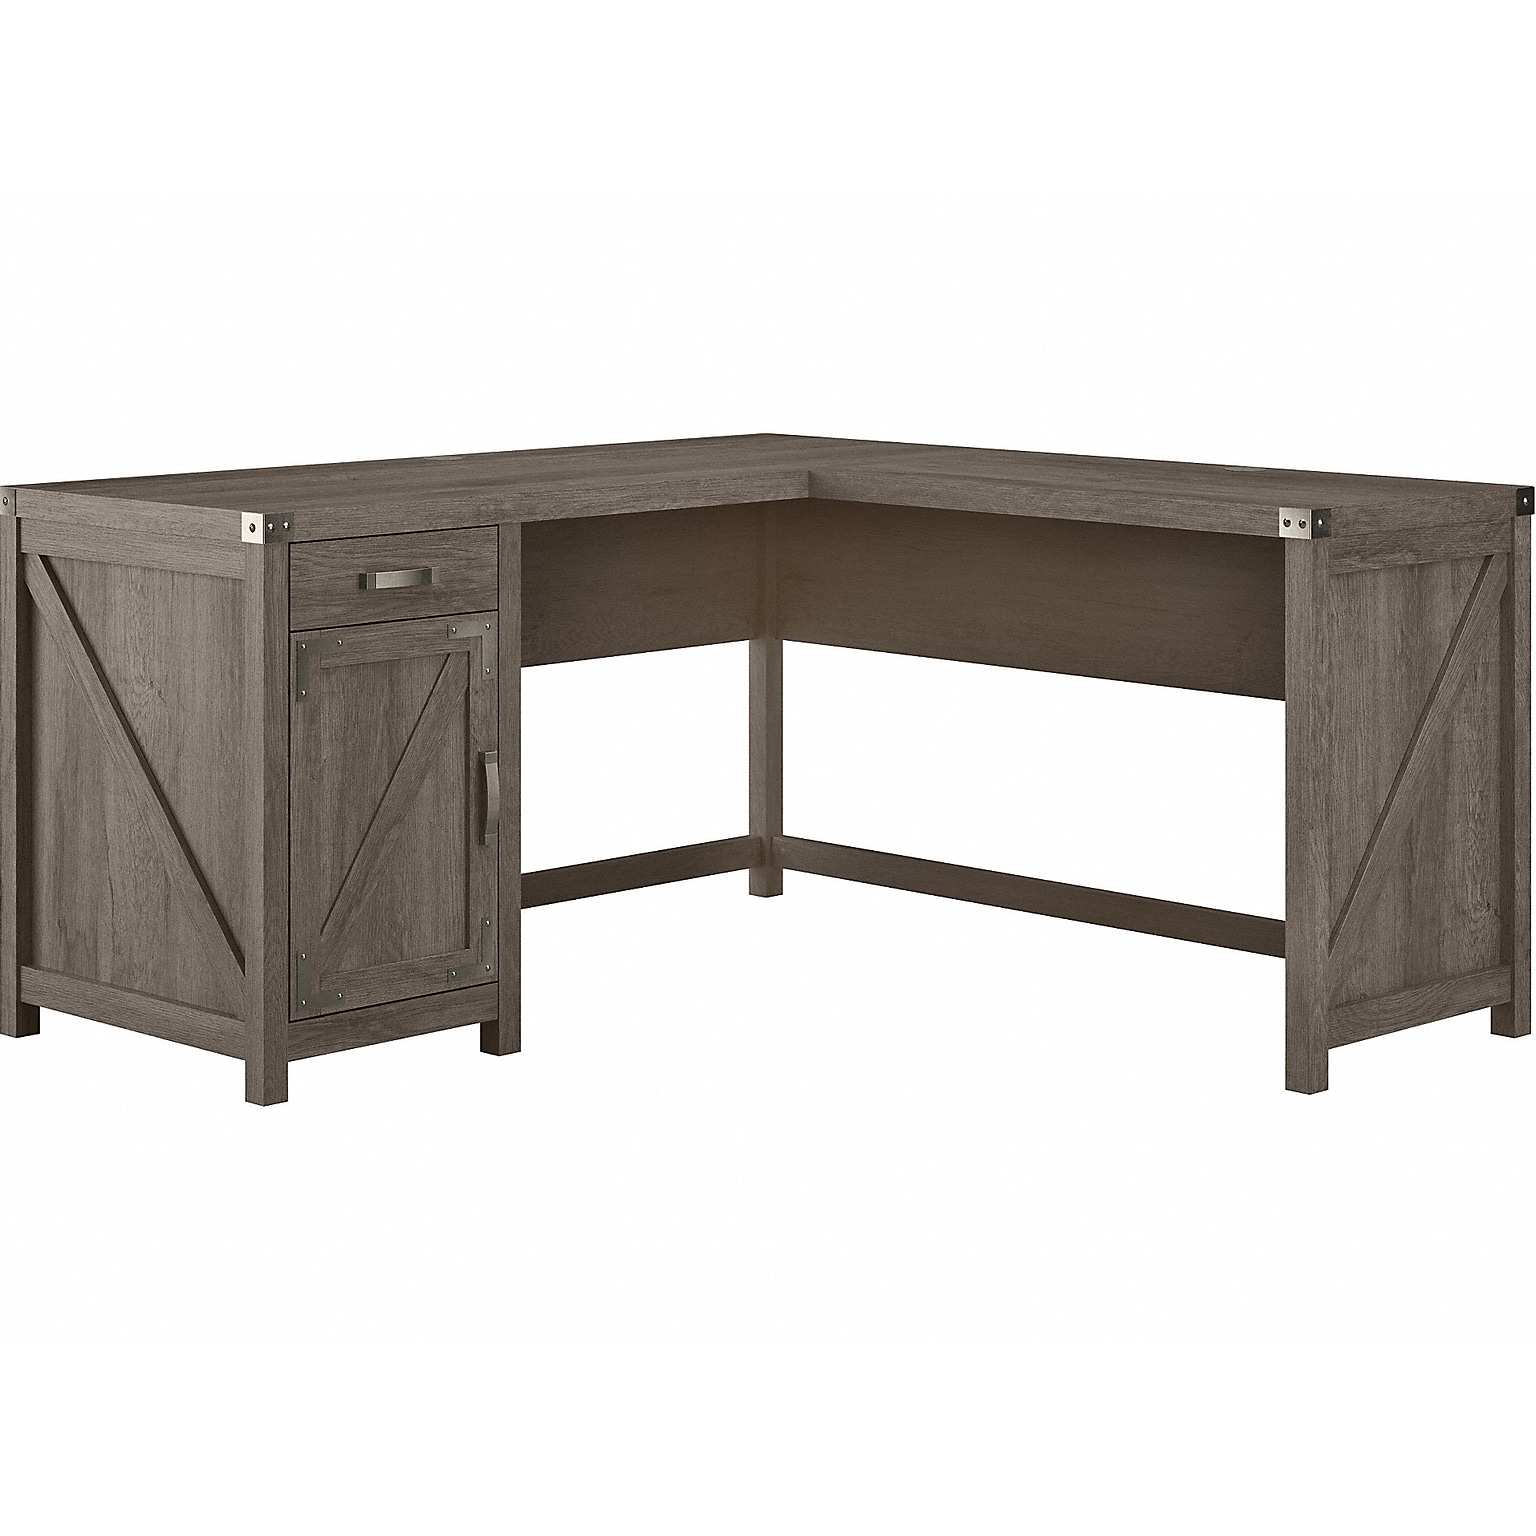 kathy ireland® Home by Bush Furniture Cottage Grove 60 L-Shaped Desk with Drawer, Restored Gray (CGD160RTG-03)